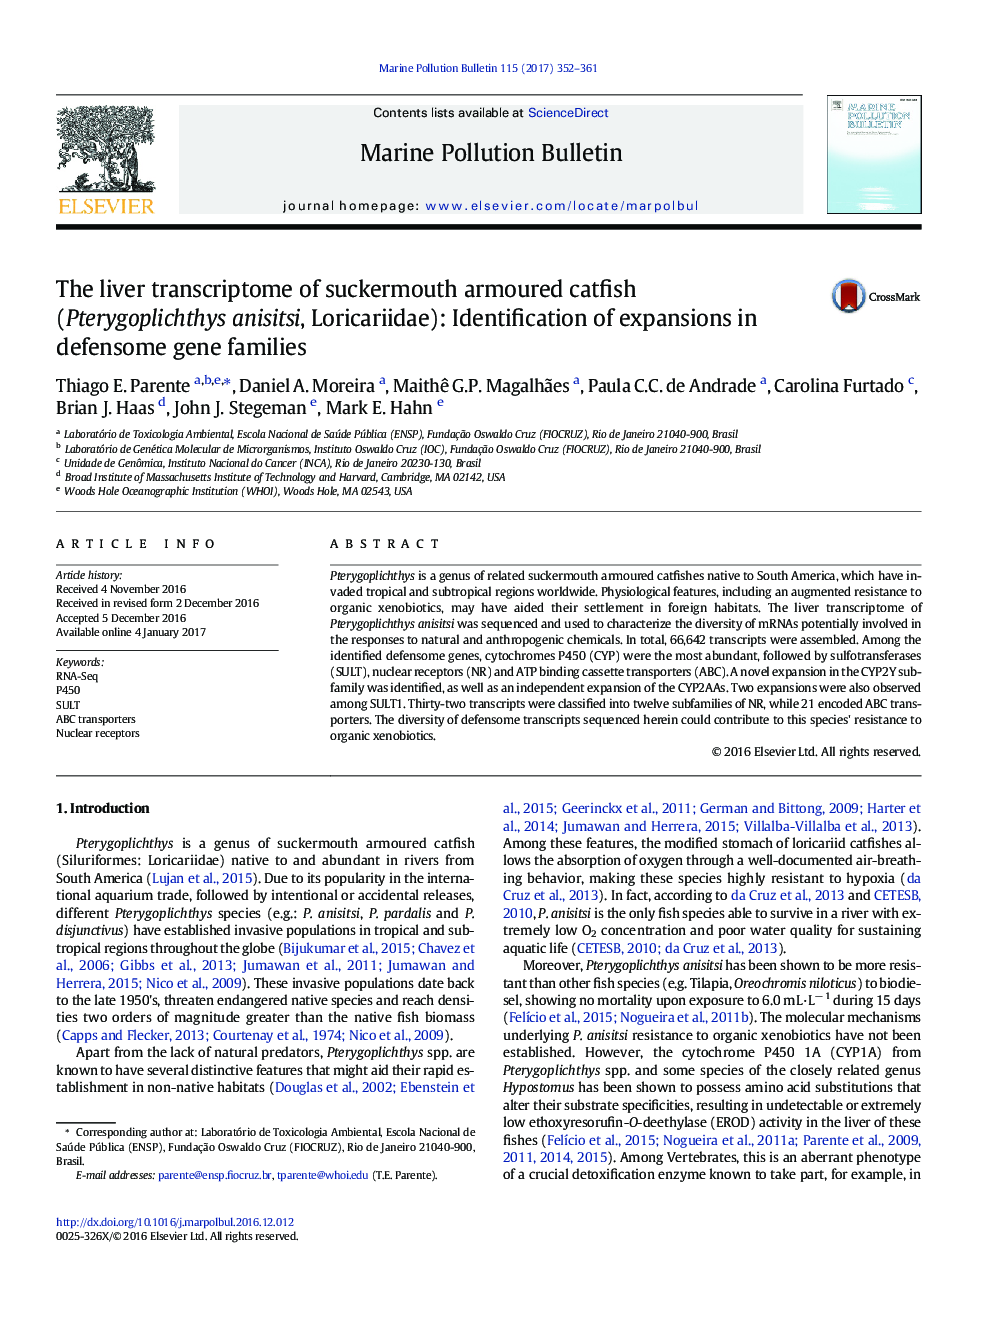 The liver transcriptome of suckermouth armoured catfish (Pterygoplichthys anisitsi, Loricariidae): Identification of expansions in defensome gene families